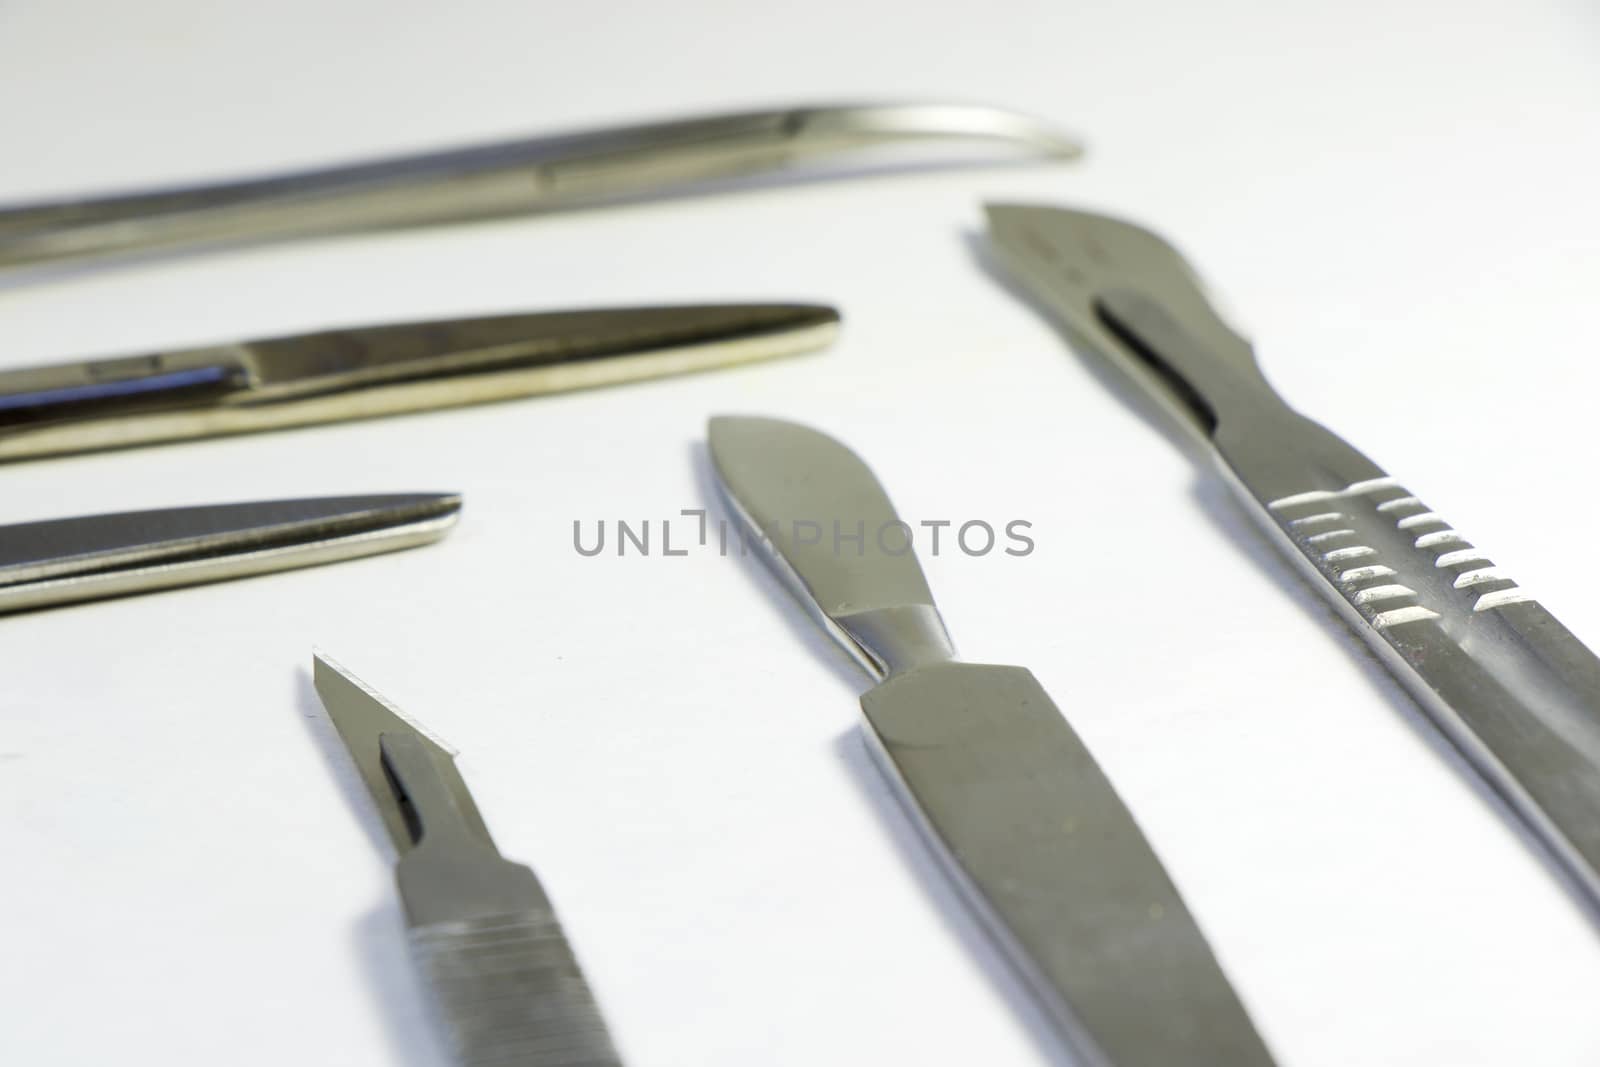 Dissection Kit - Premium Quality Stainless Steel Tools for Medical Students of Anatomy, Biology, Veterinary, Marine Biology with Scalpel Blades Included for Dissecting Frogs. Surgery instruments.